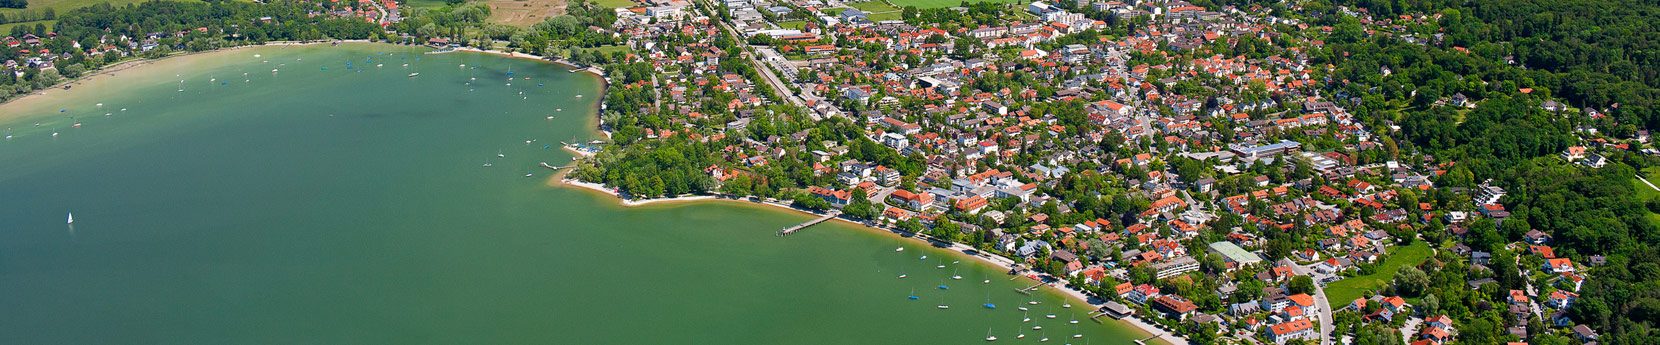 Ammersee Immobilienpreise